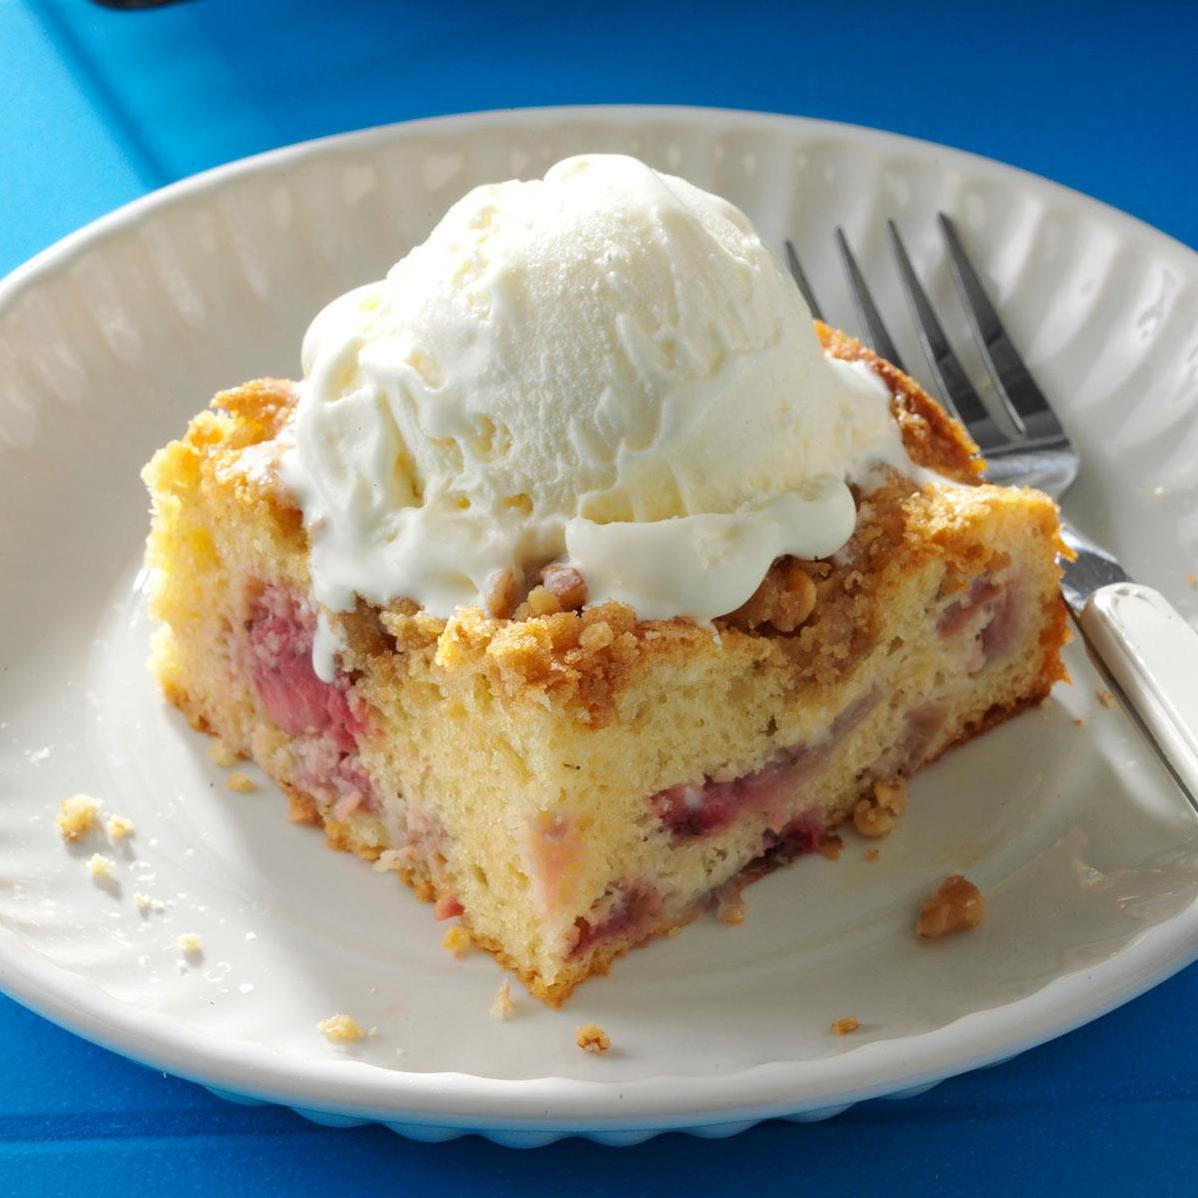  Perfectly crumbly and moist, this cake is a true crowd-pleaser.